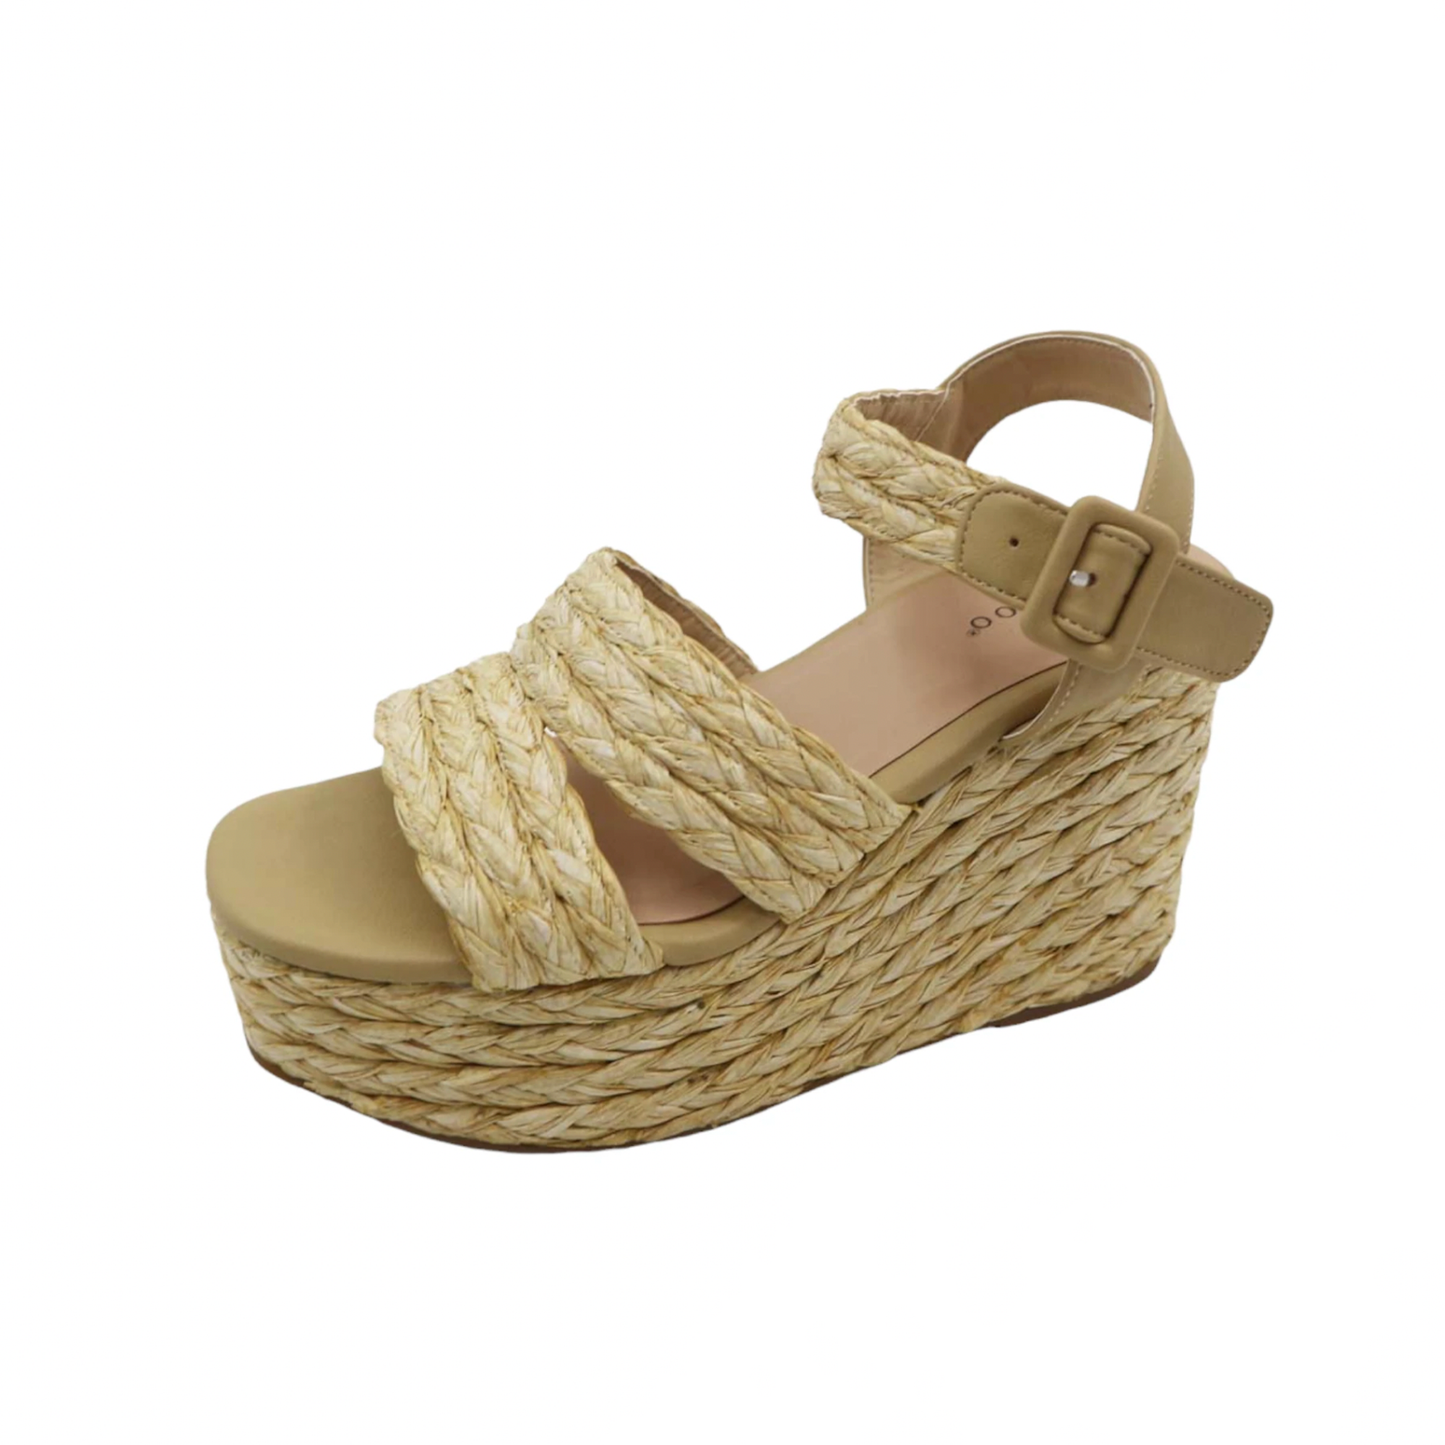 Connected Double Strap Sandal. Raffia and boho chic go hand in hand and this wedge is all about it